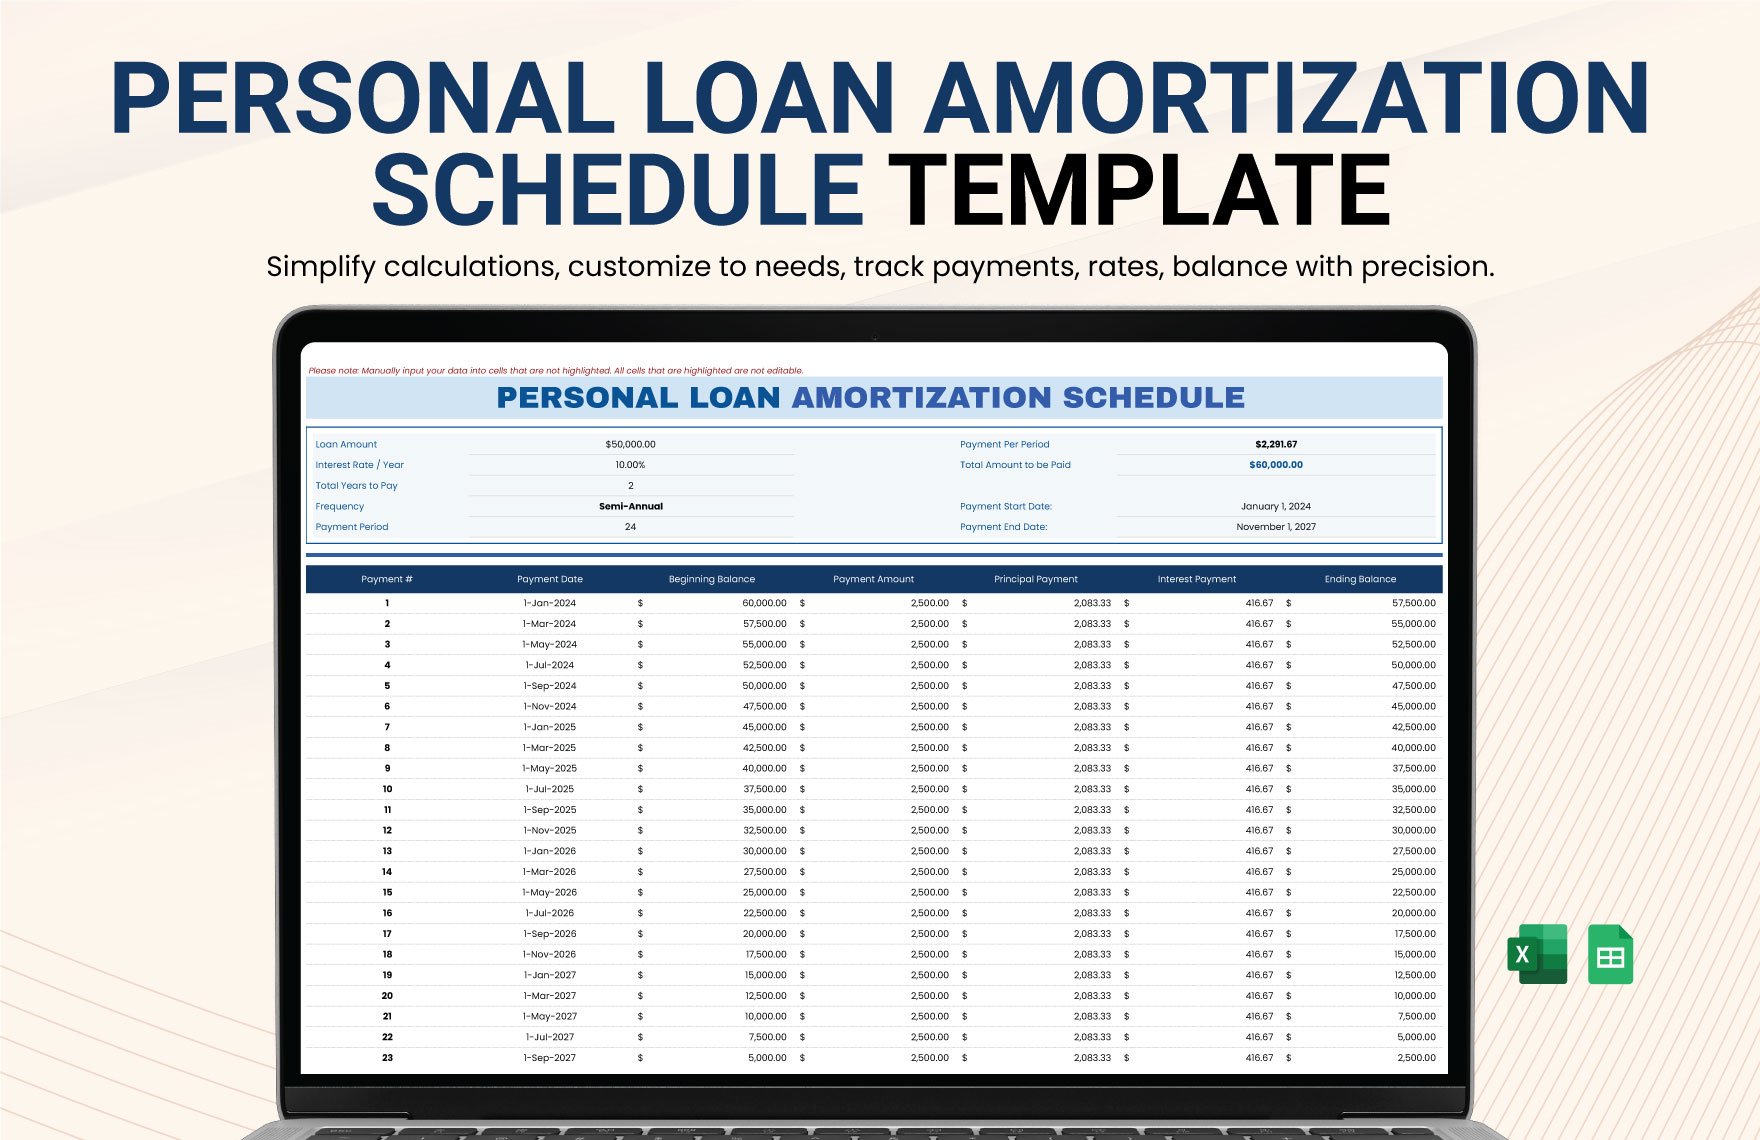 Personal Loan Amortization Schedule Template in Excel, Google Sheets